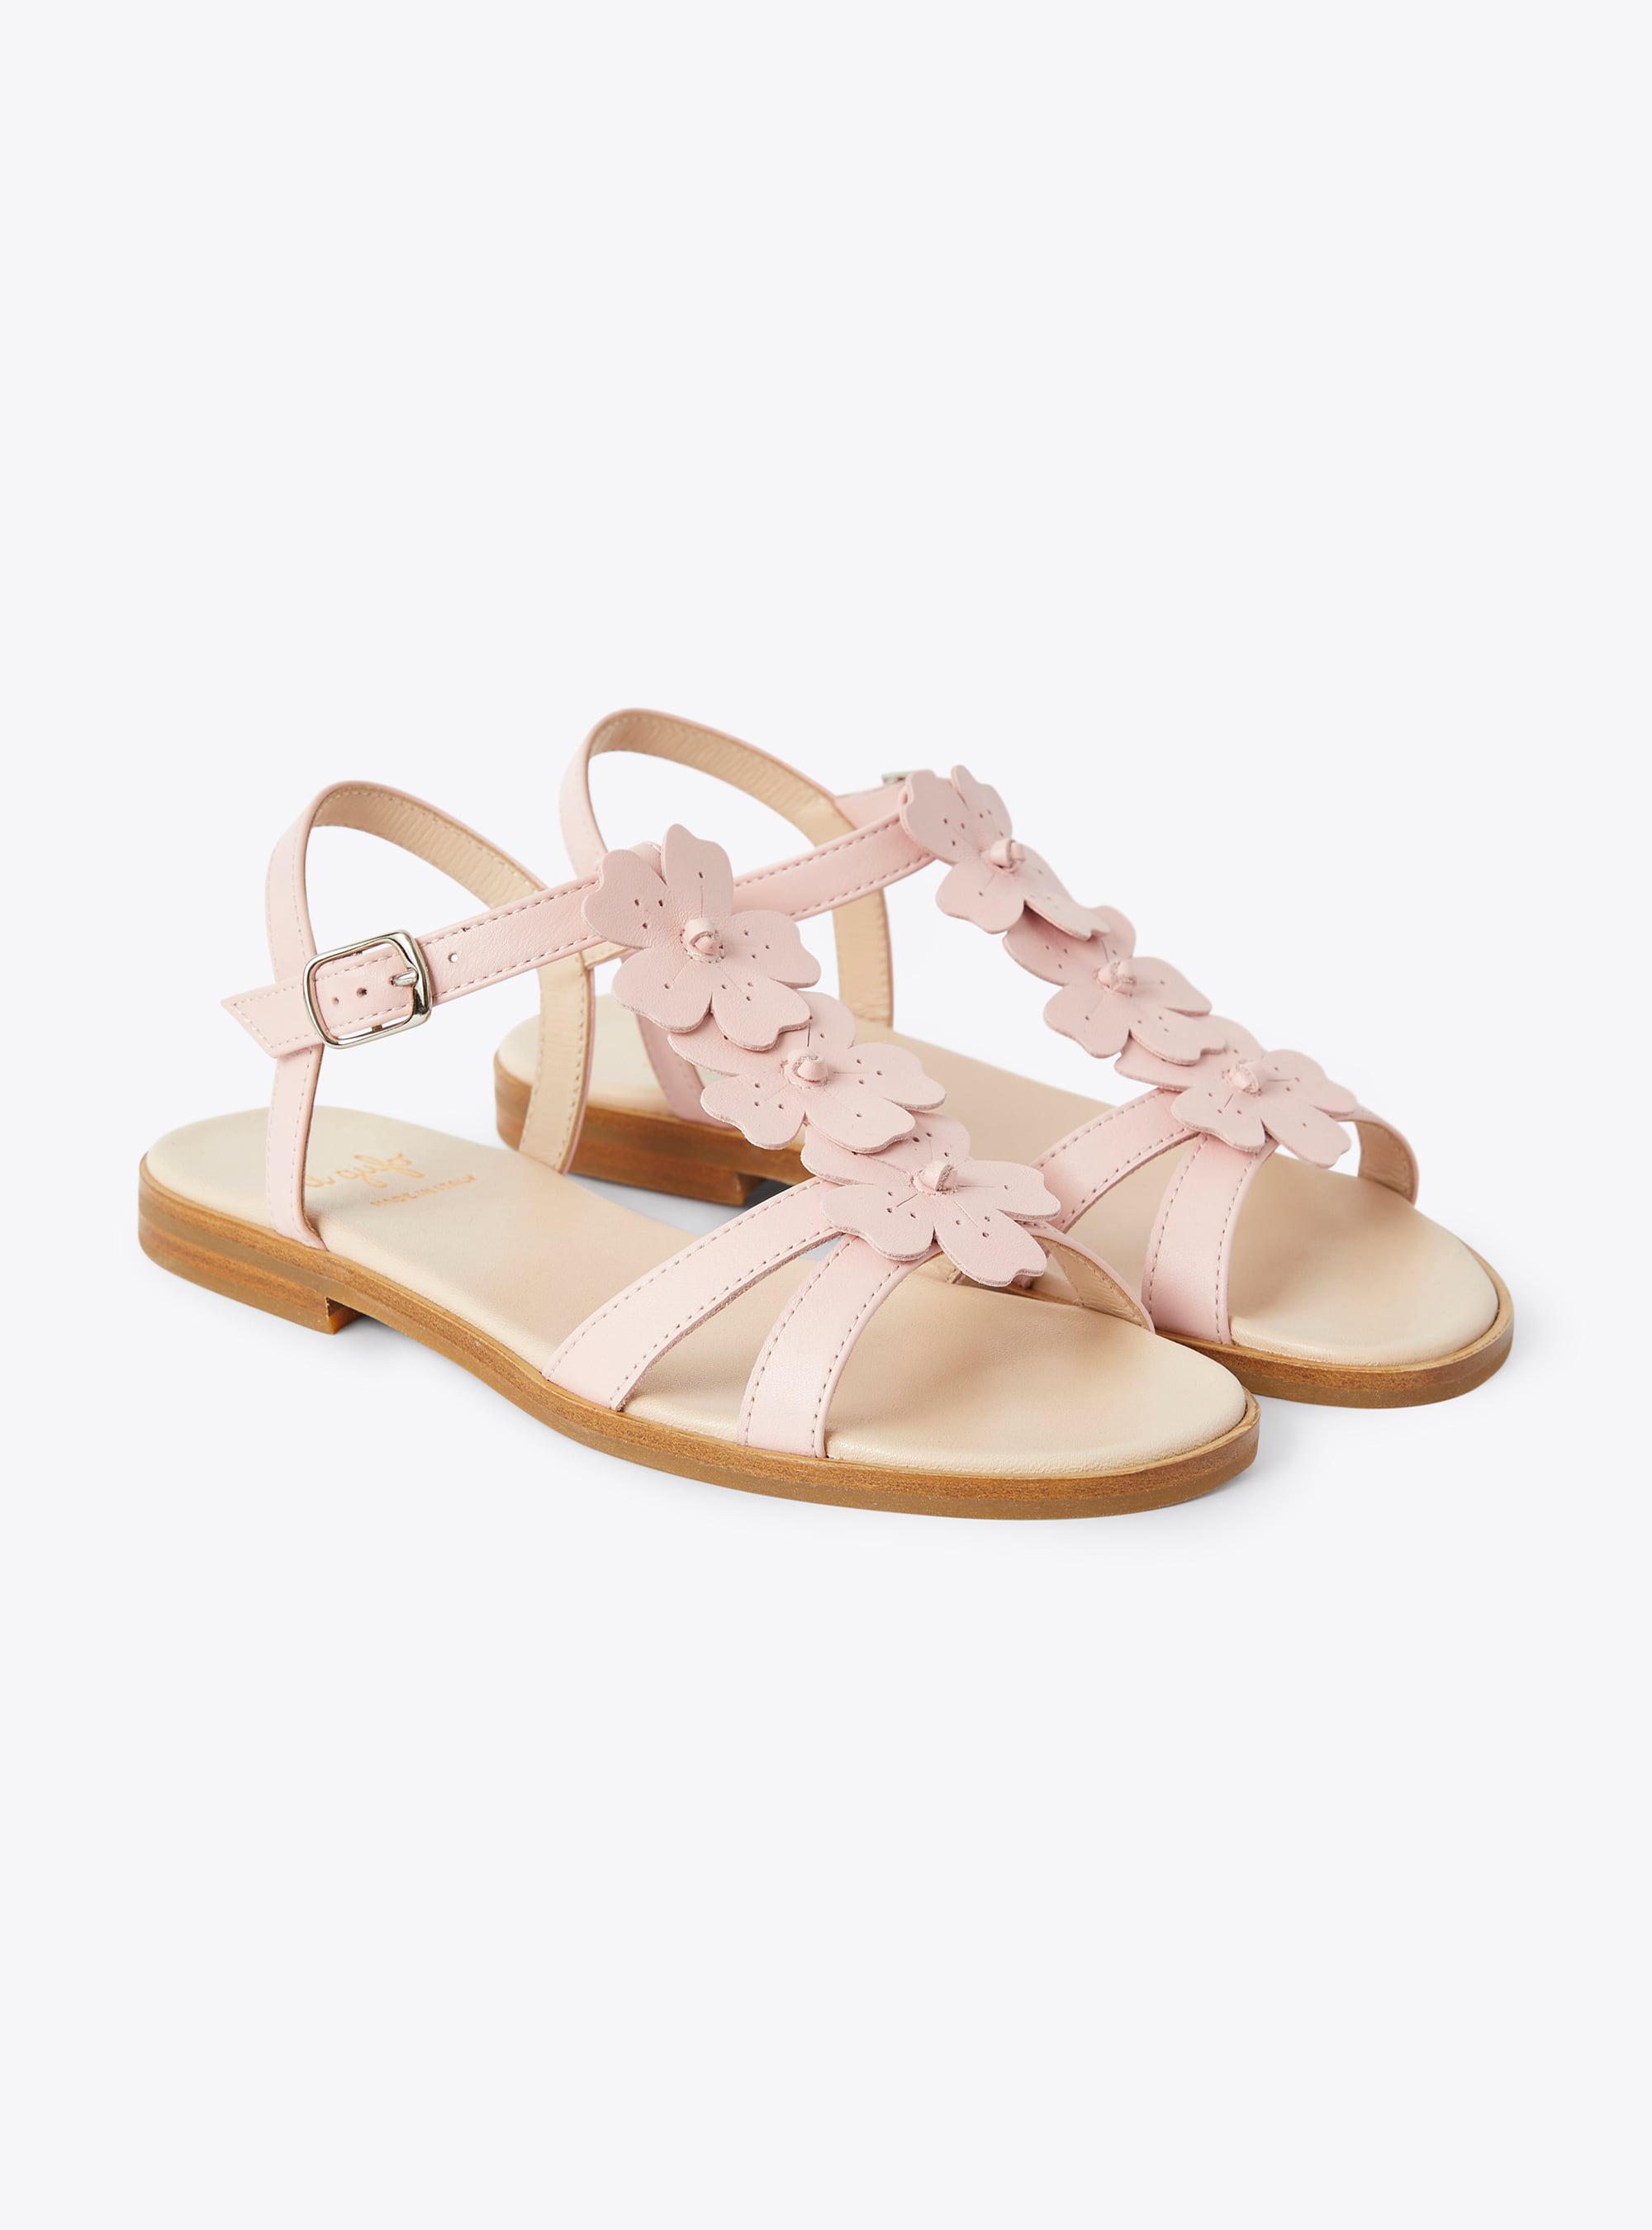 Leather sandal with flower embellishment in pink - Shoes - Il Gufo